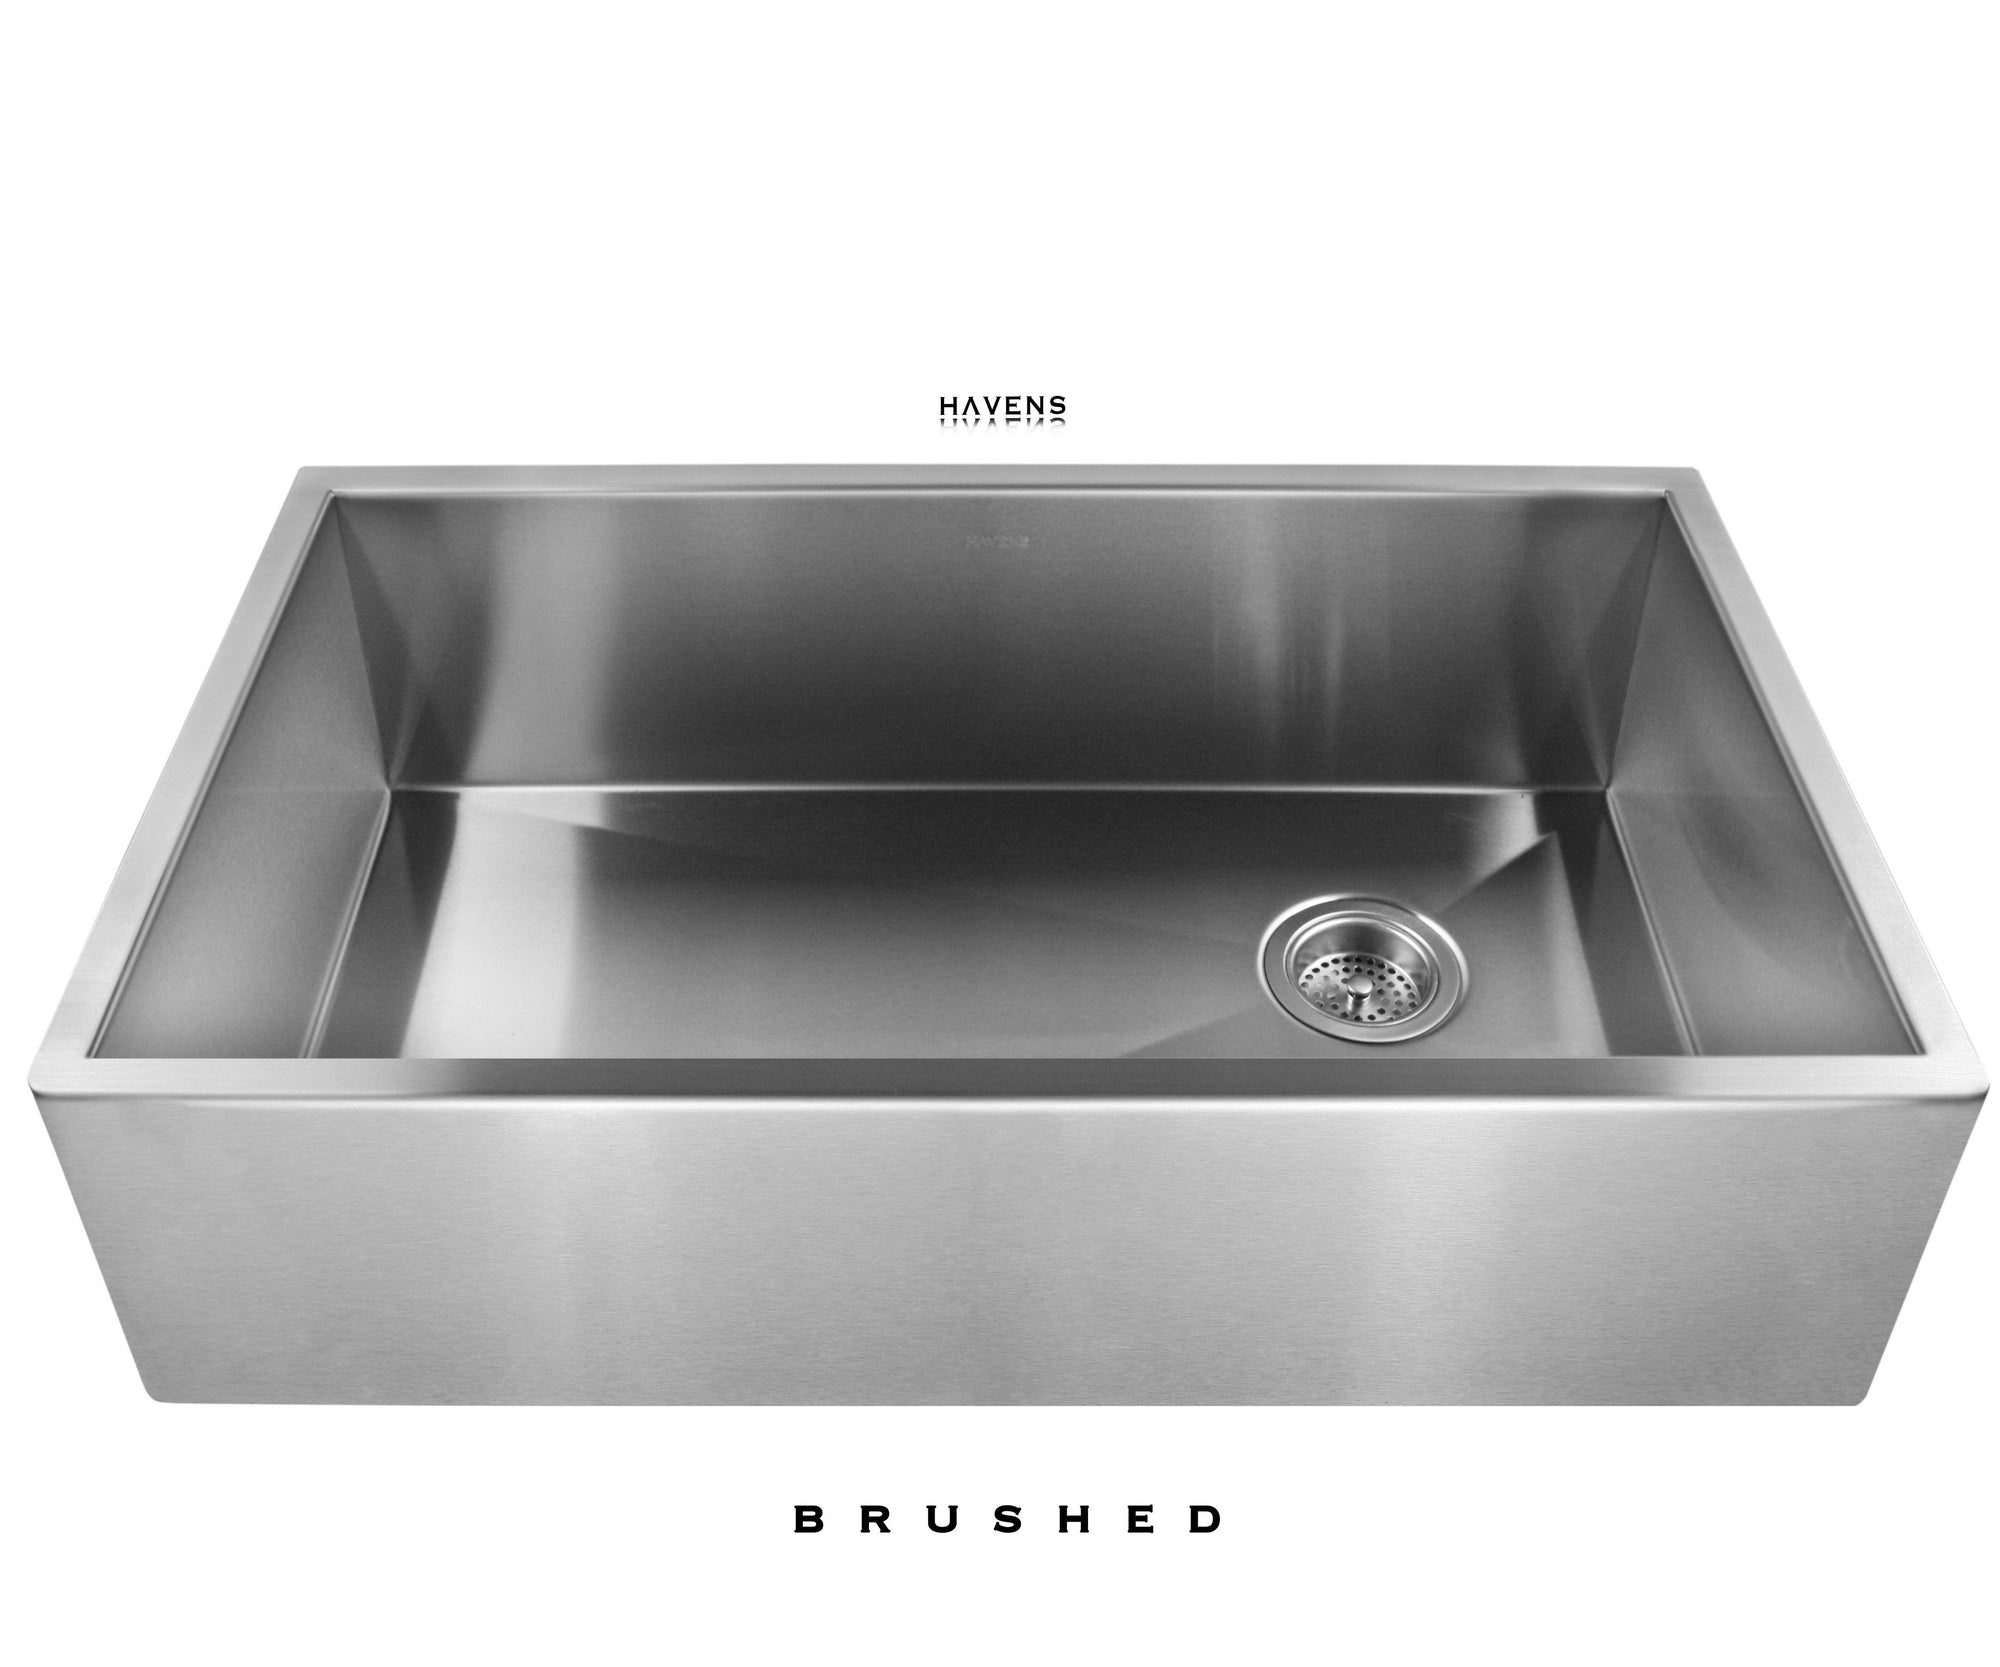 Brushed Stainless steel farmhouse apron front sink with a brushed finish. Handcrafted from 16 gauge stainless steel and installed under red quartz. 